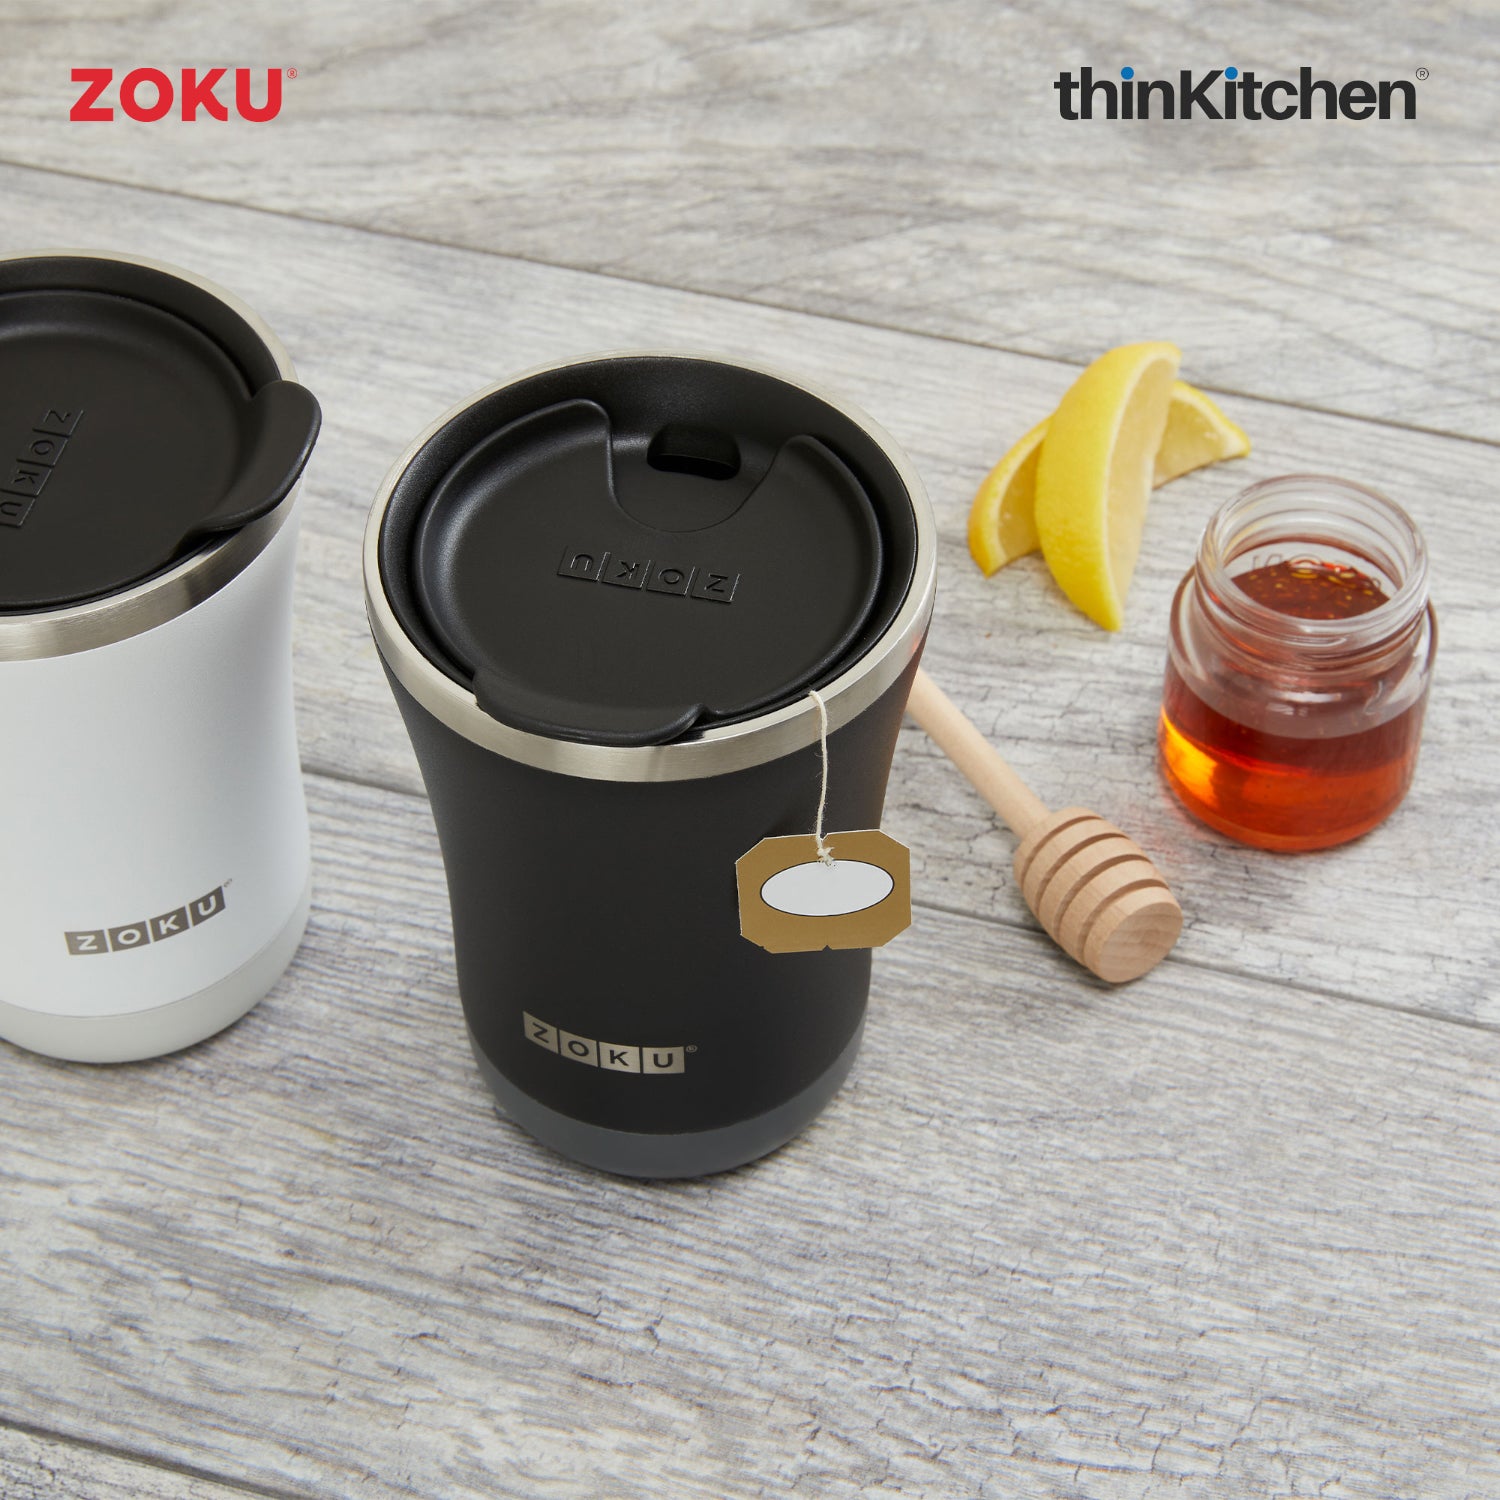 Zoku 12oz 3-in-1 Stainless Steel Tumbler Powder Coated Ash